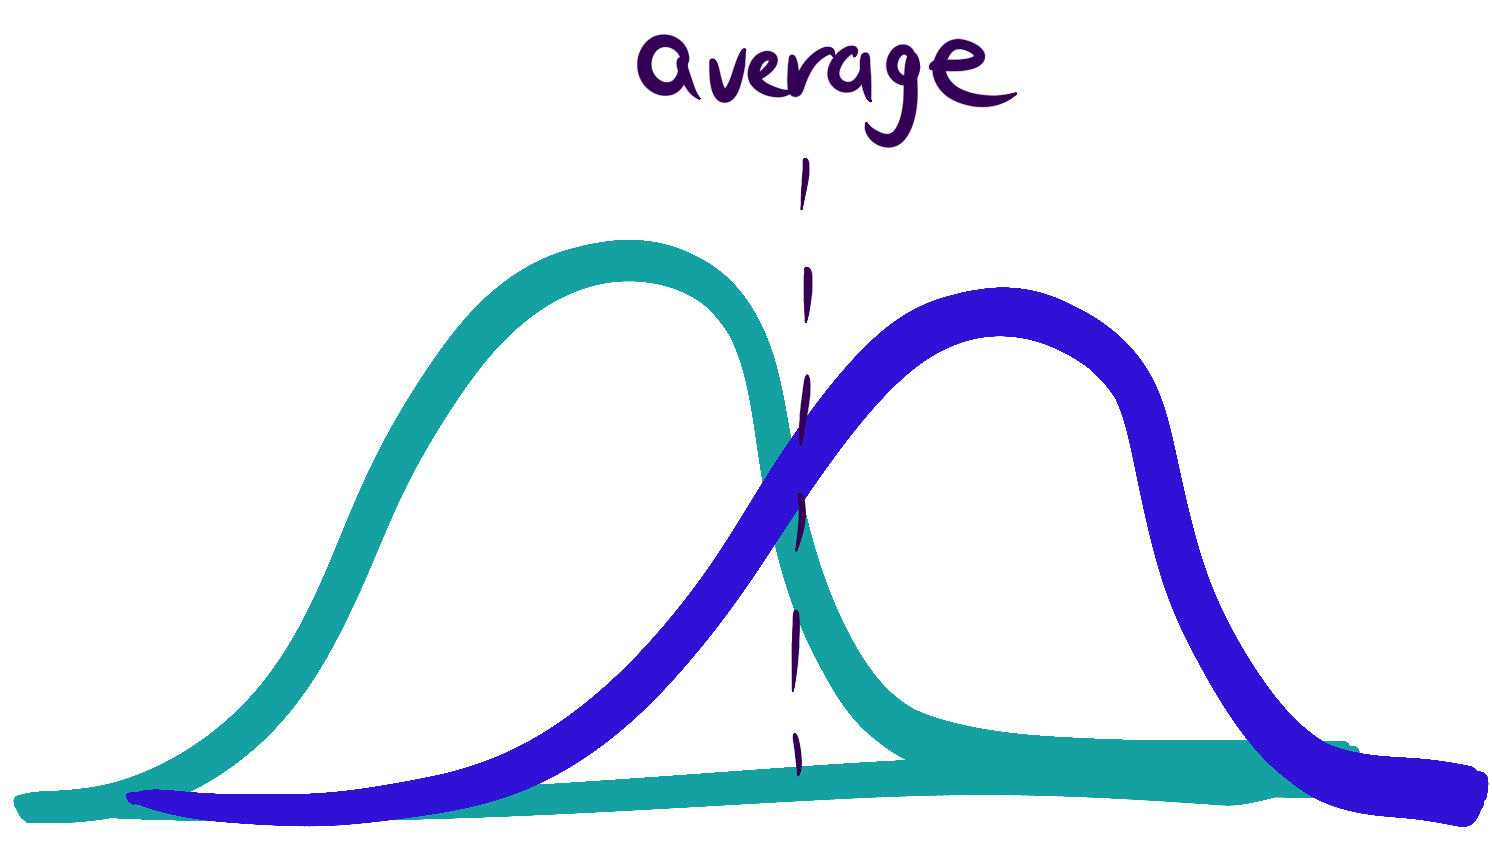 Sketch of a bimodal distribution, which looks like two parabolas that slightly overlap. A dotted line indicating the average falls between the two curves.